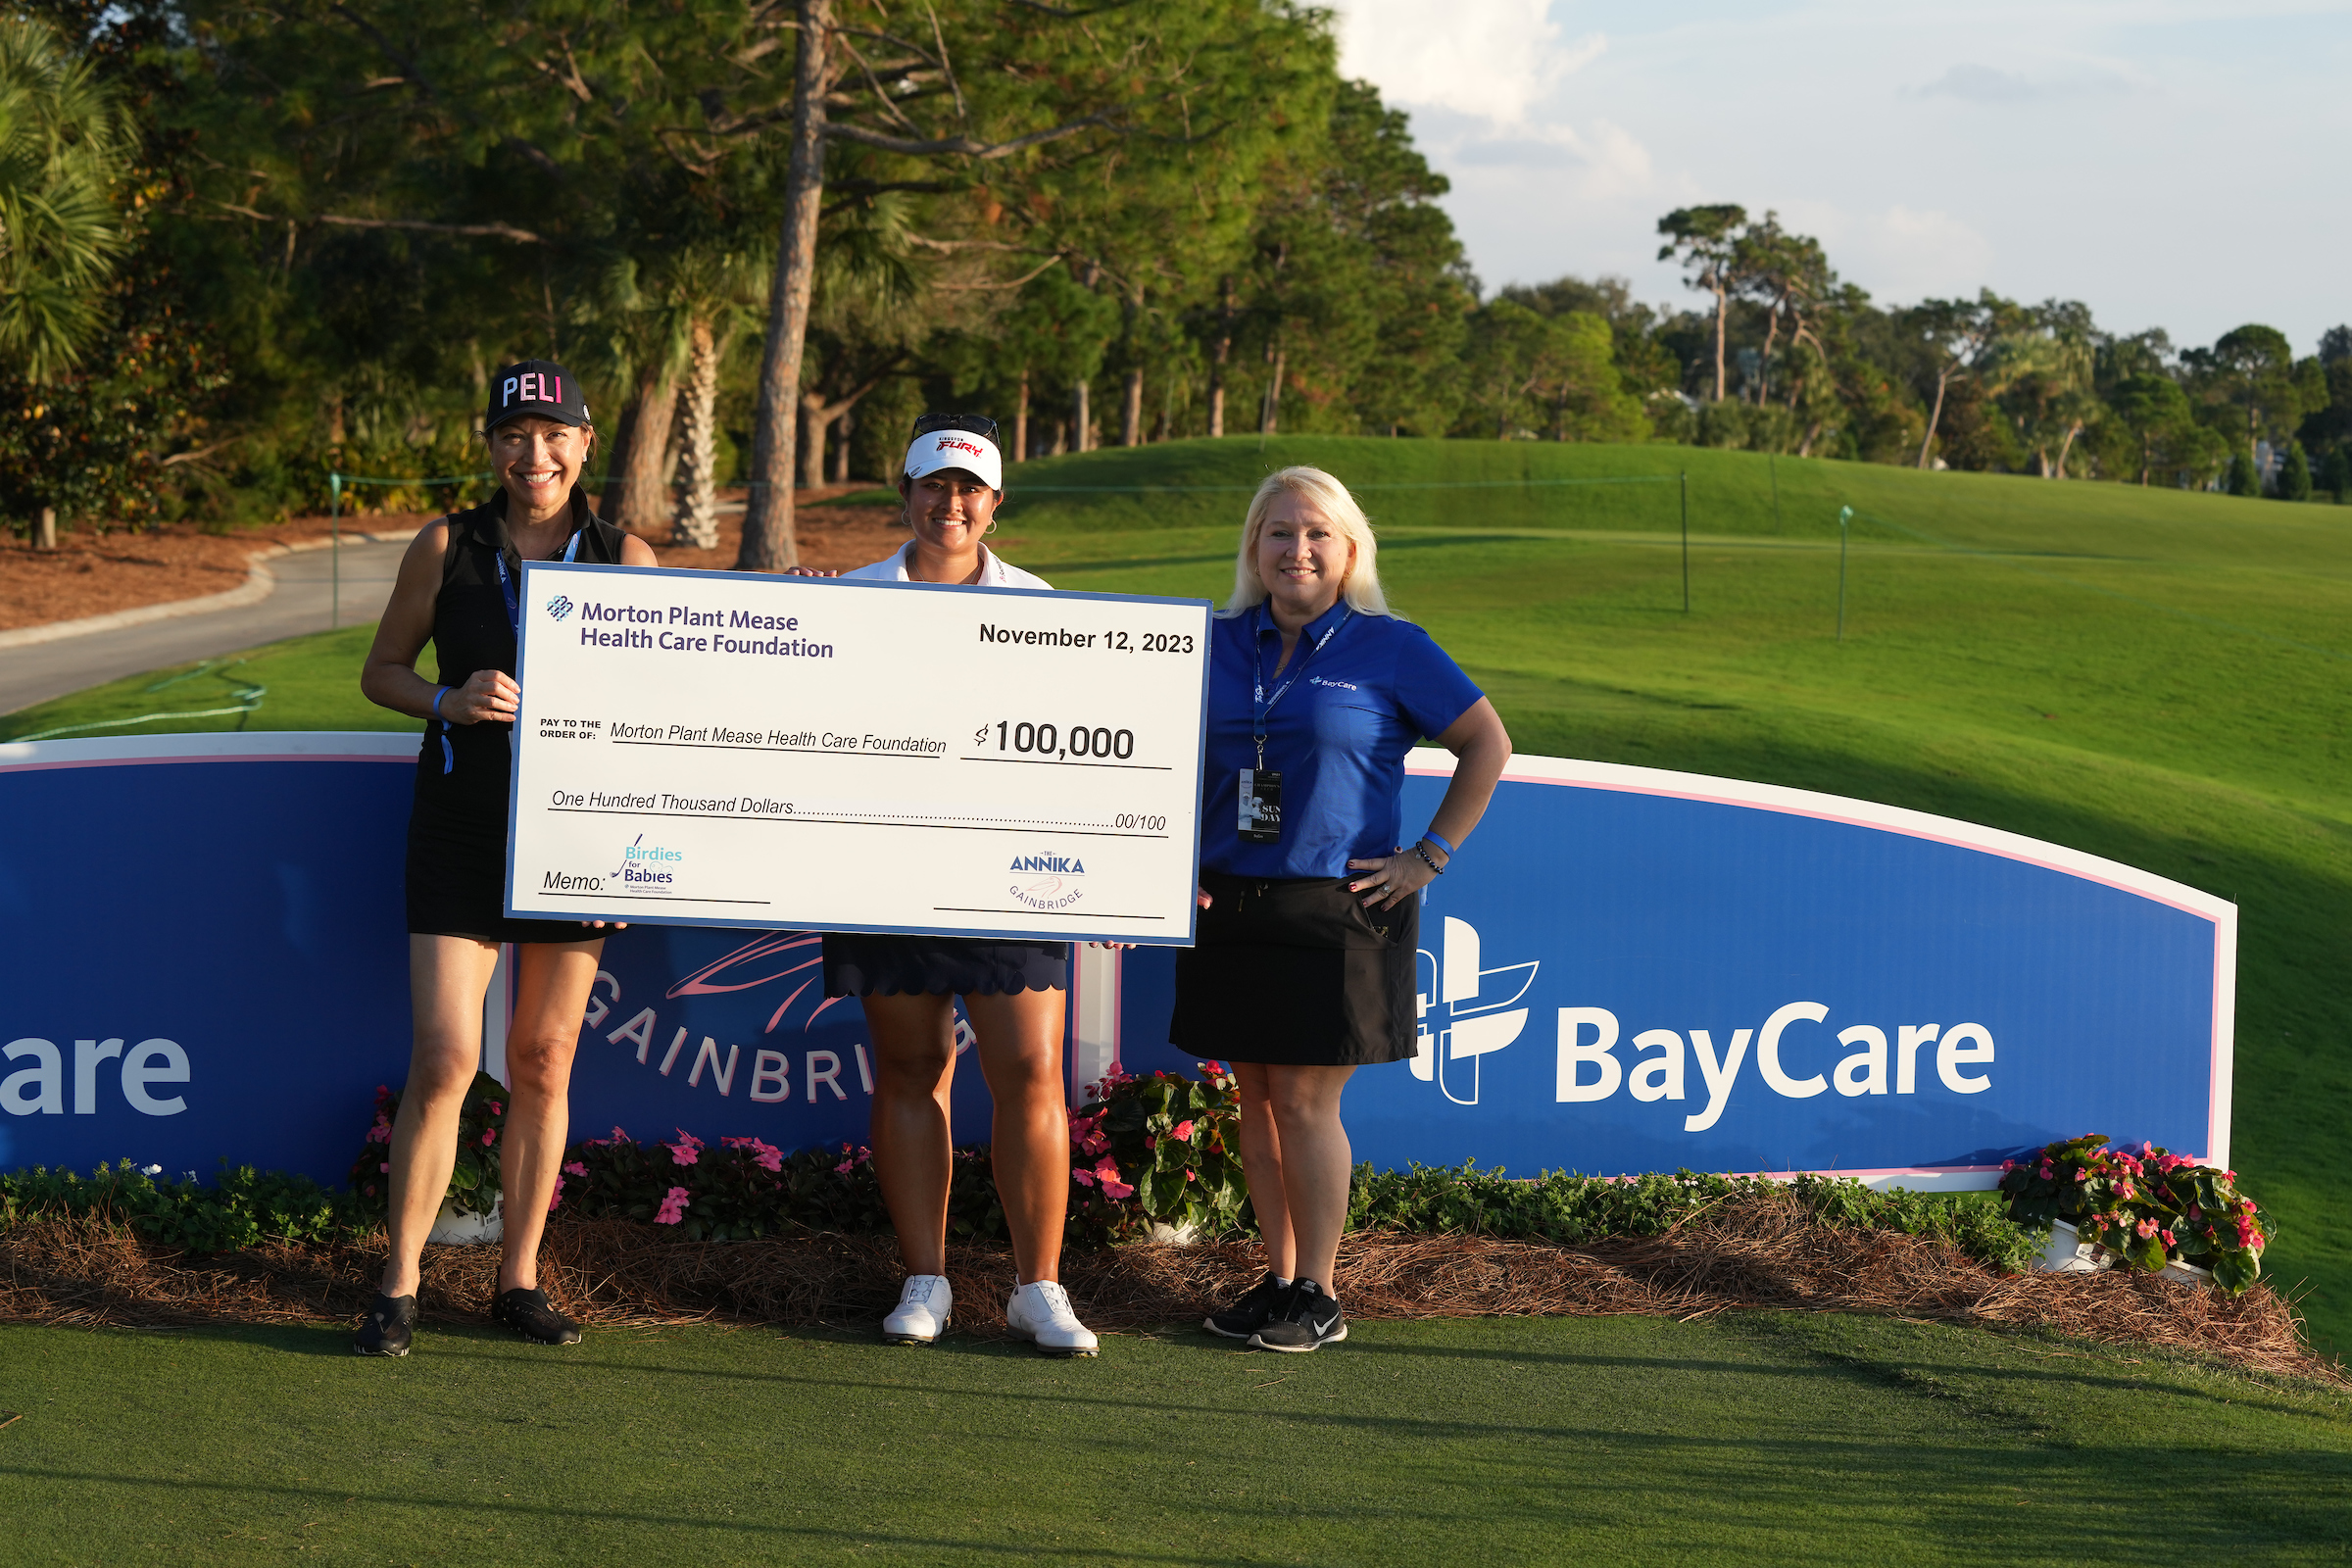 The ANNIKA driven by Gainbridge at Pelican Donates $100,000 to the Morton Plant Mease Health Care Foundation